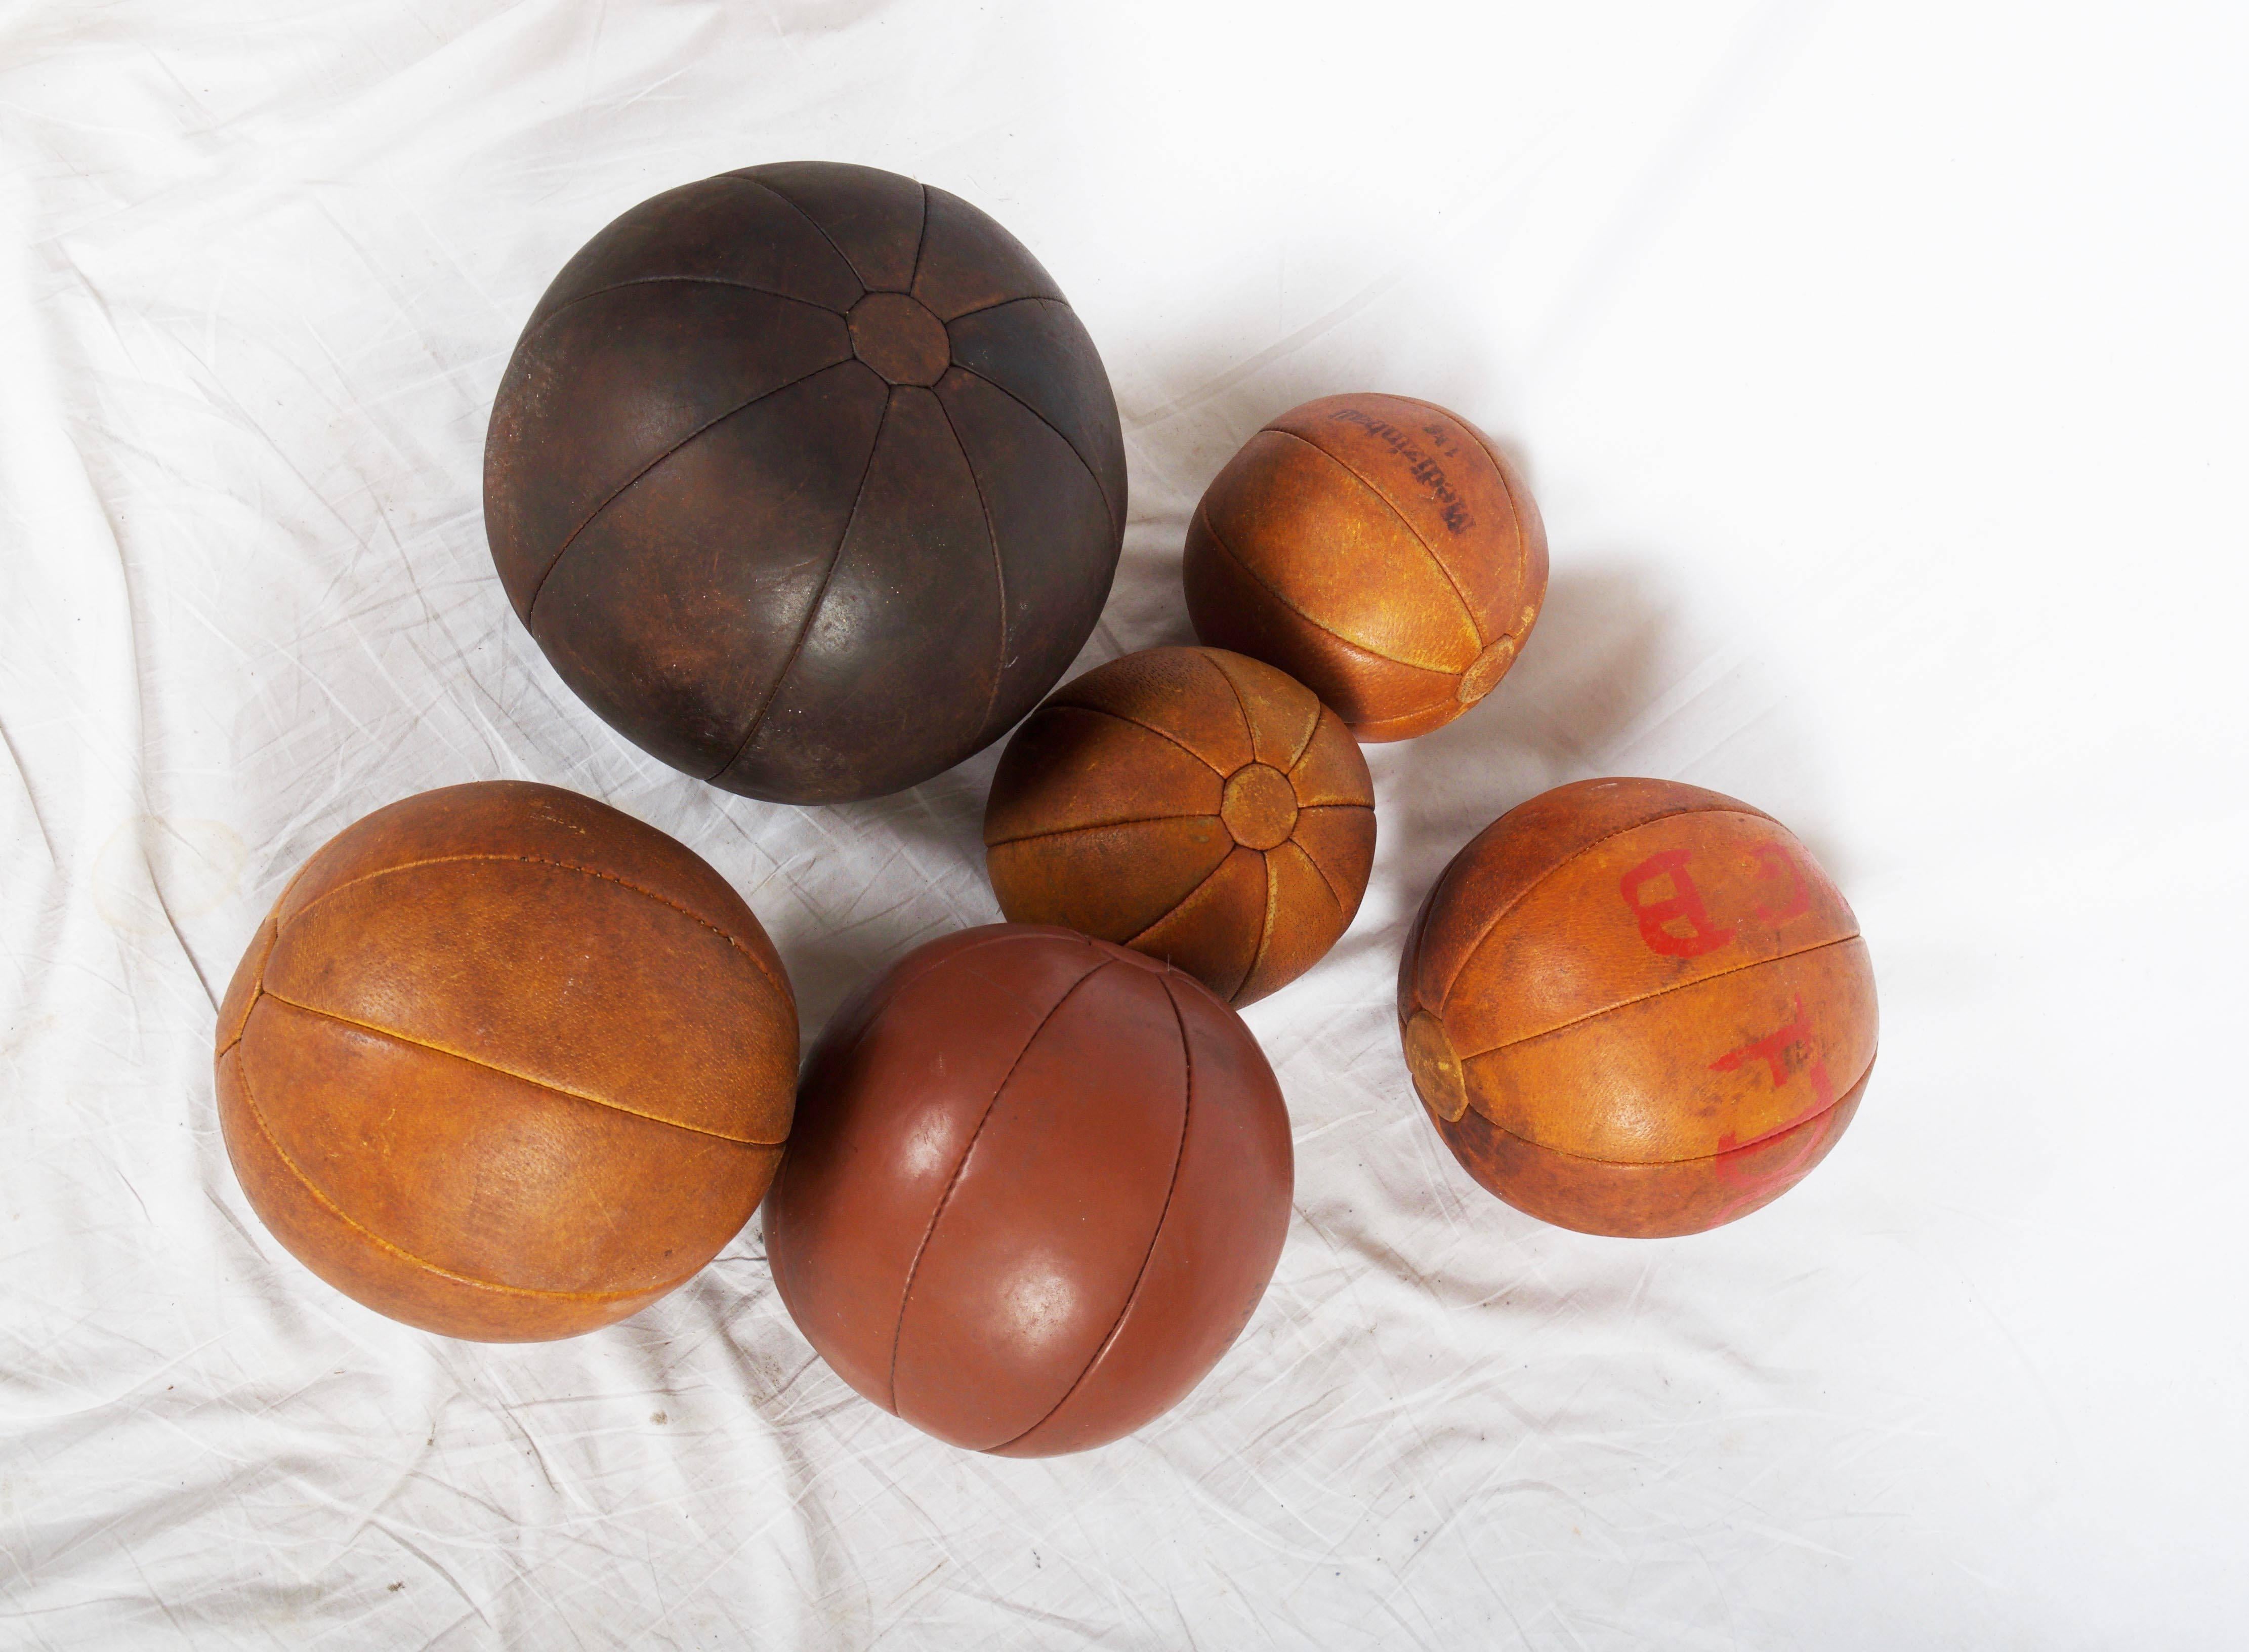 Original patinated leather medicine balls, two with 1kg, two with 2kg one with 1.5kg and one with 3kg diameter from 20 to 35cm, made in Germany in the 1950s.